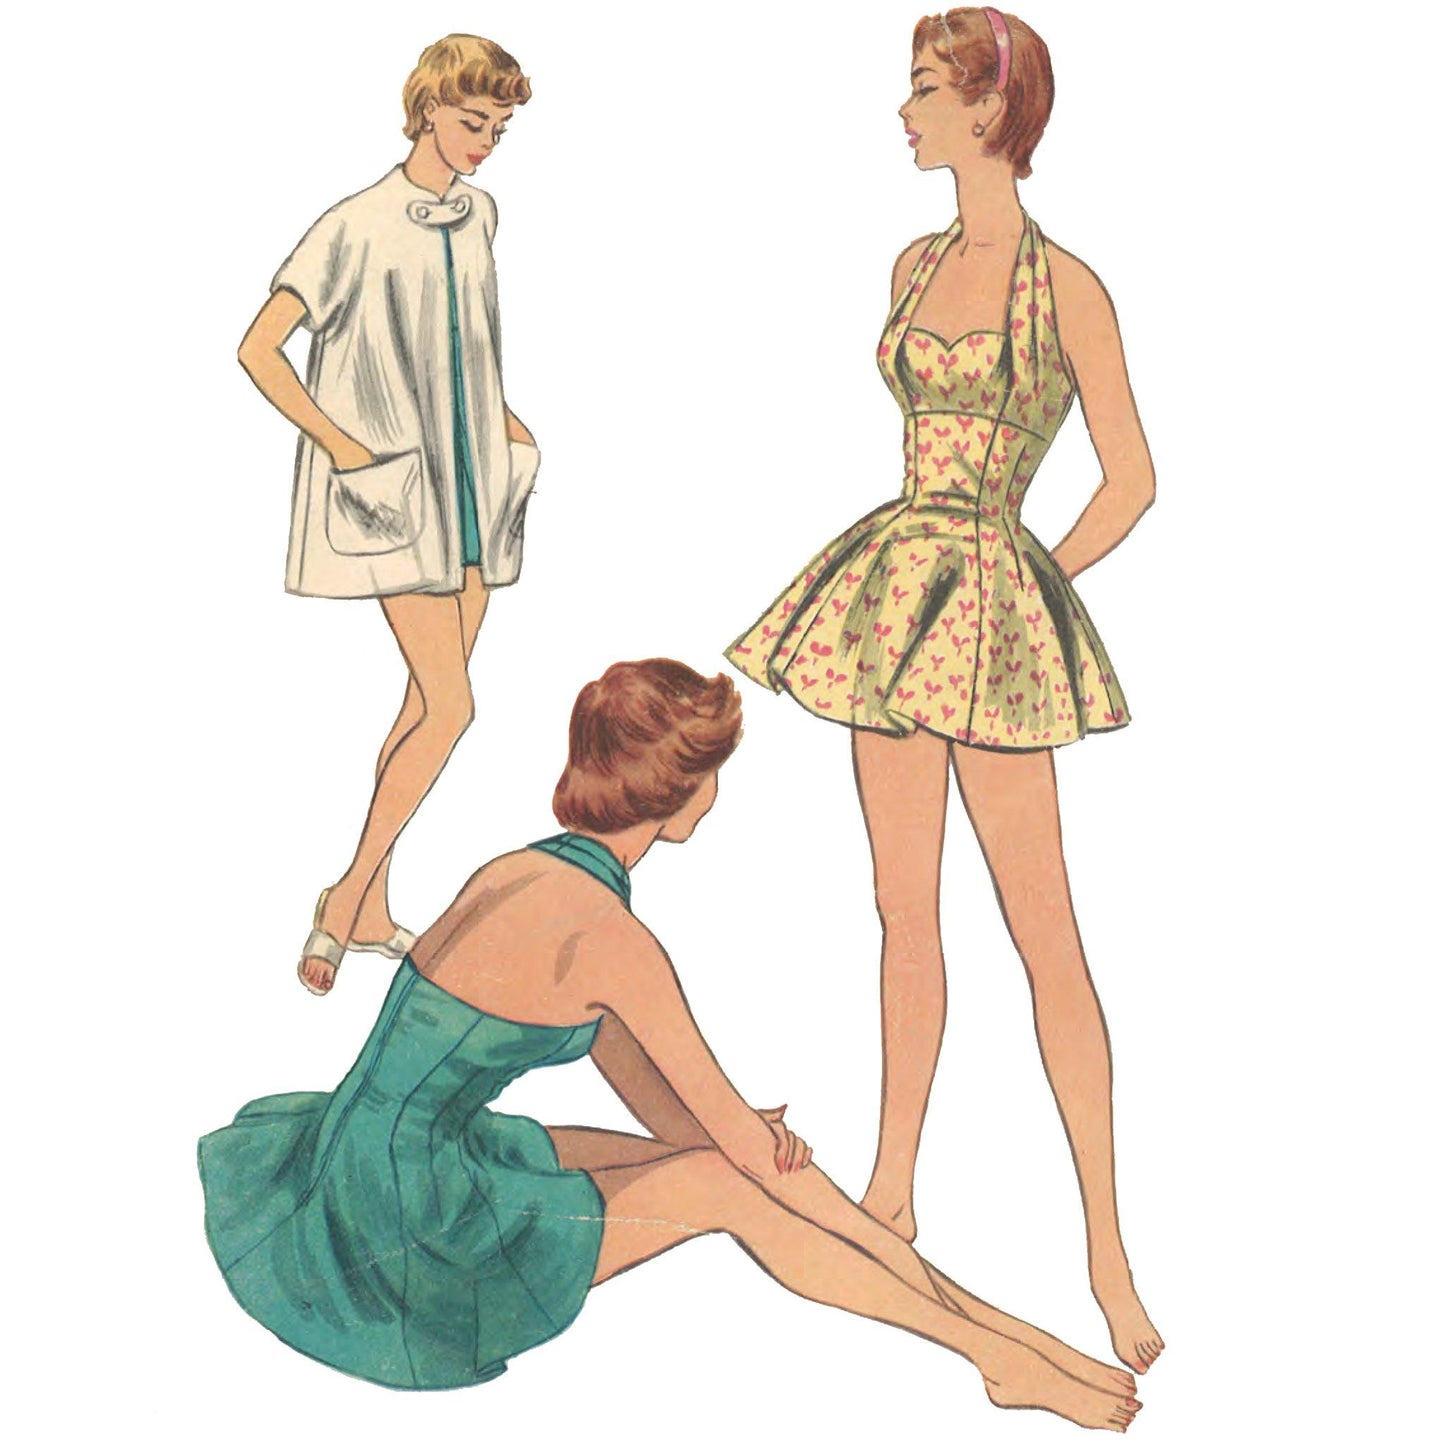 Pattern cover illustration showing women wearing bathing suit and beach coat